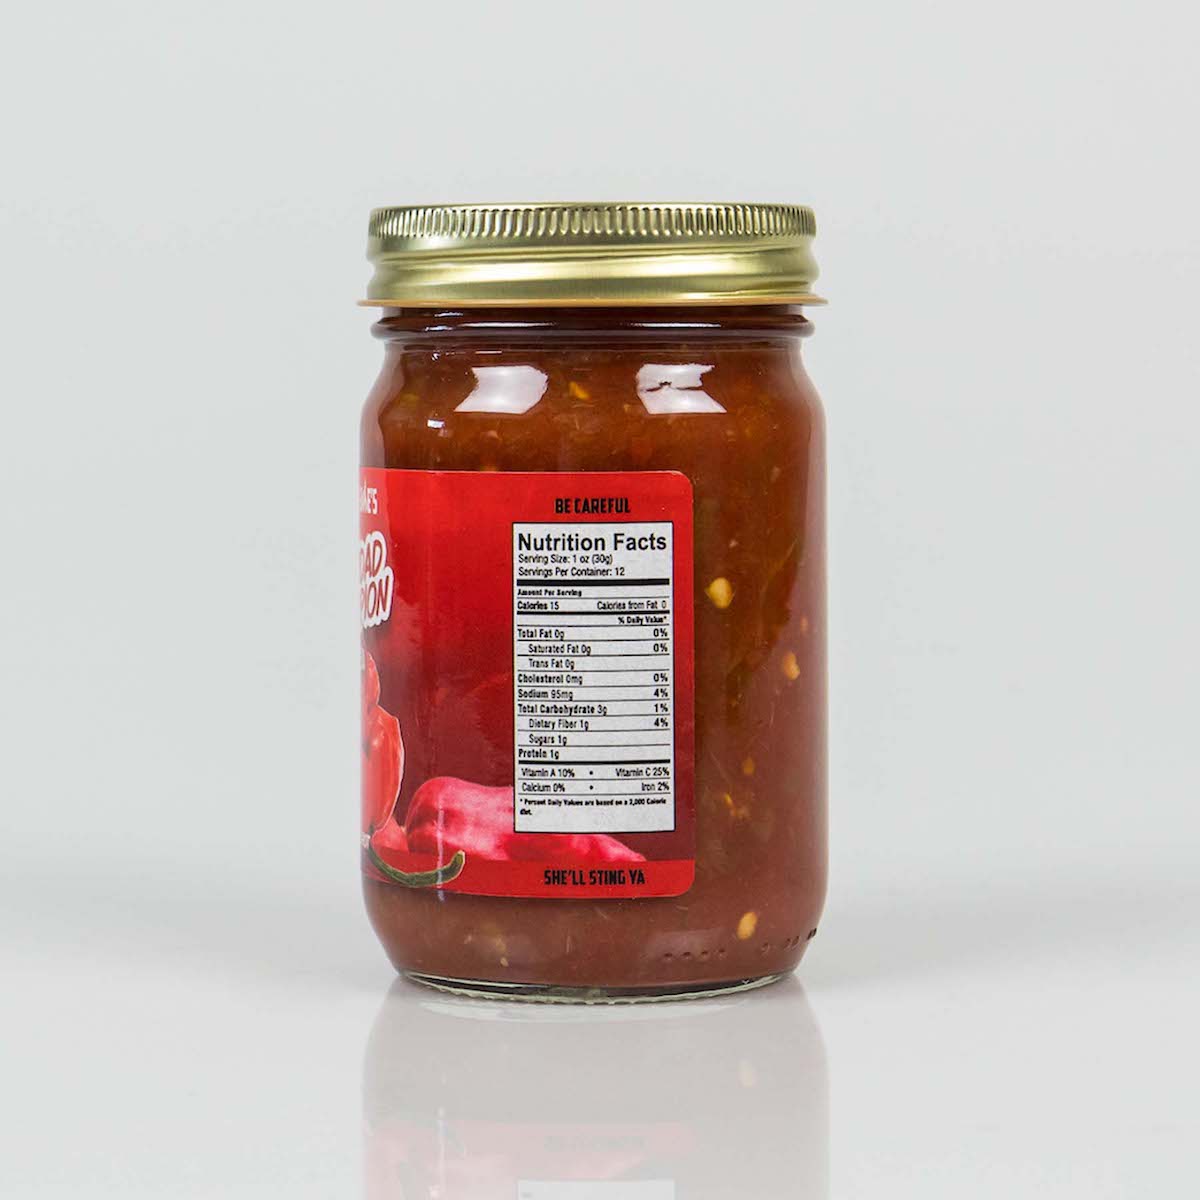 Pepper Joe’s Trinidad Scorpion Salsa – Dangerously Delicious Superhot Salsa with World’s 2nd hottest Pepper – 12 Ounce Jar of Spicy Salsa